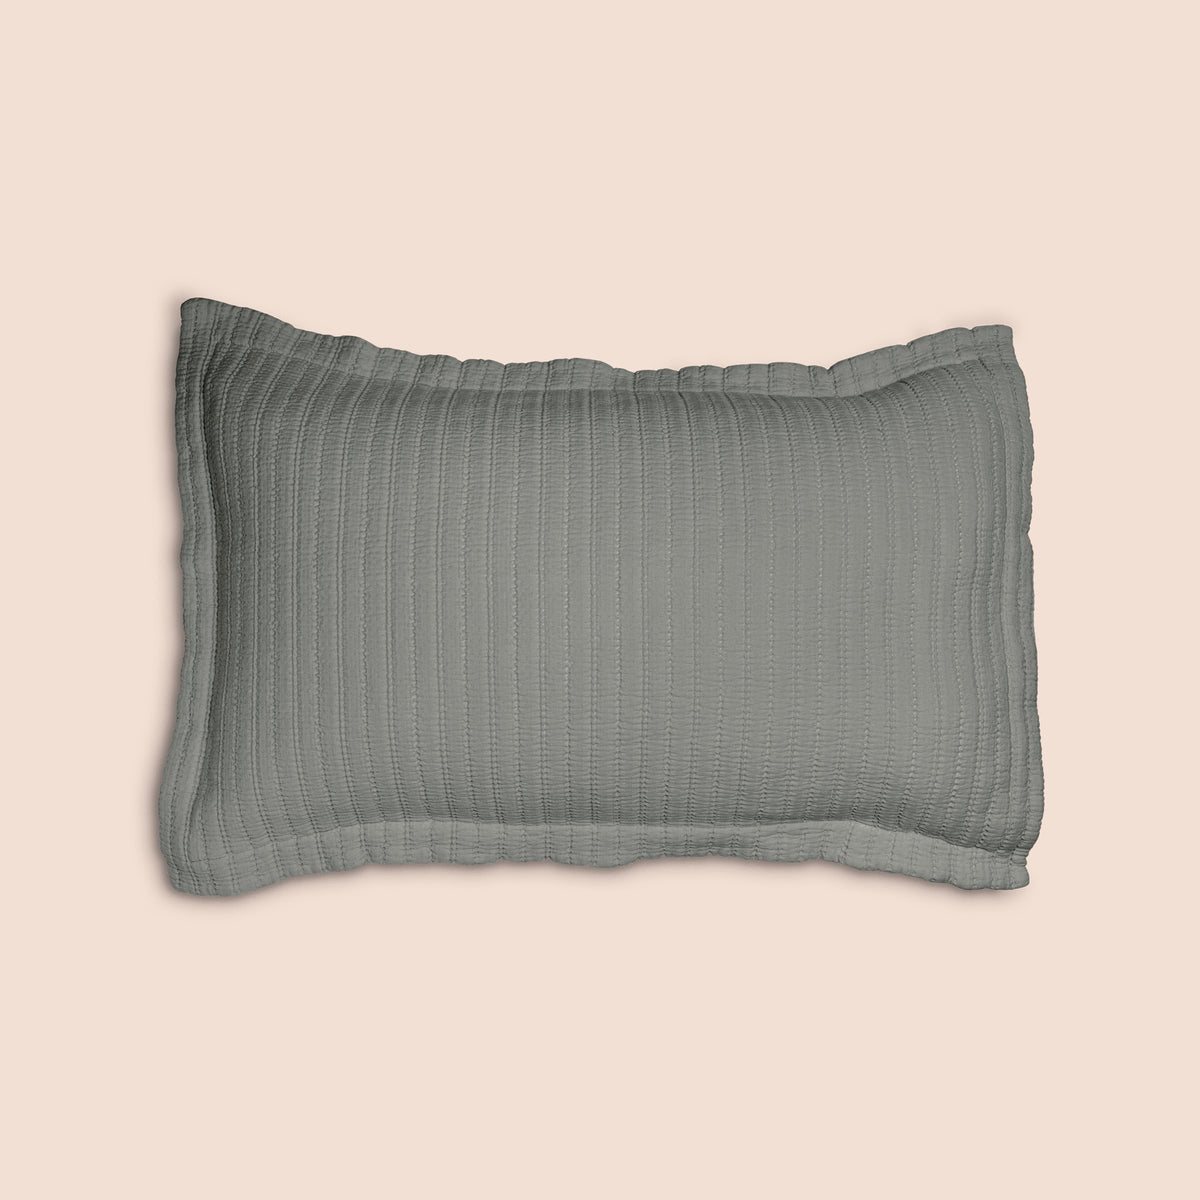 Image of the Agave Ridgeback Pillow Sham featured on a pillow with a light pink background